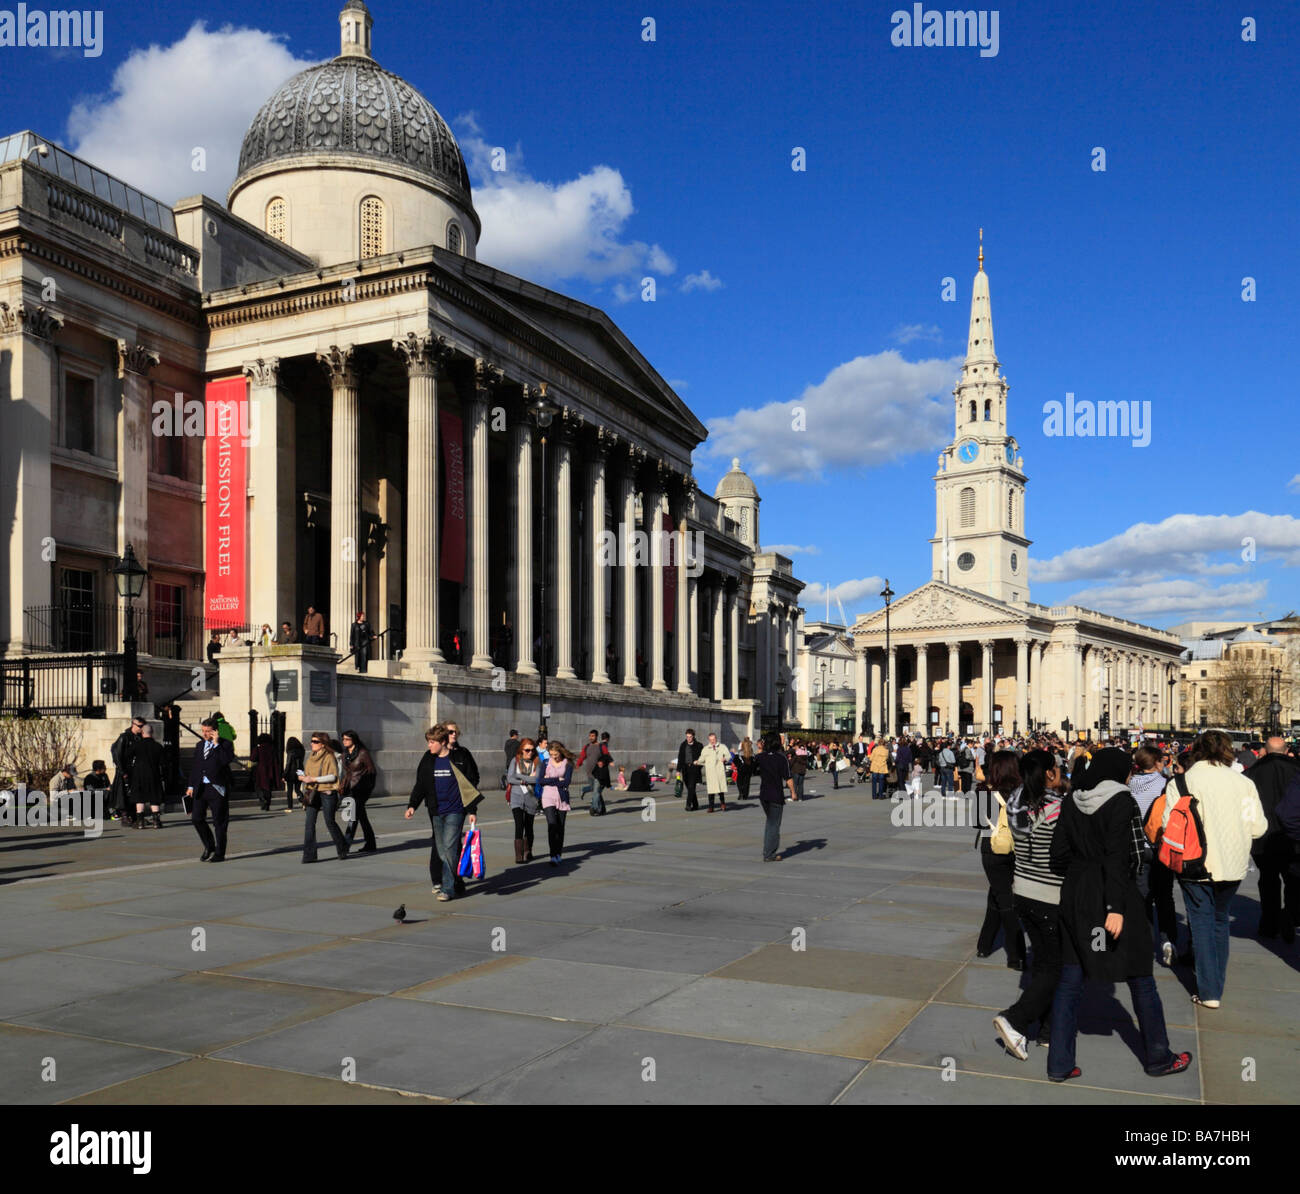 The National Art Gallery and St Martin in the Fields Church. Trafalgar Square, London, England, UK. Stock Photo